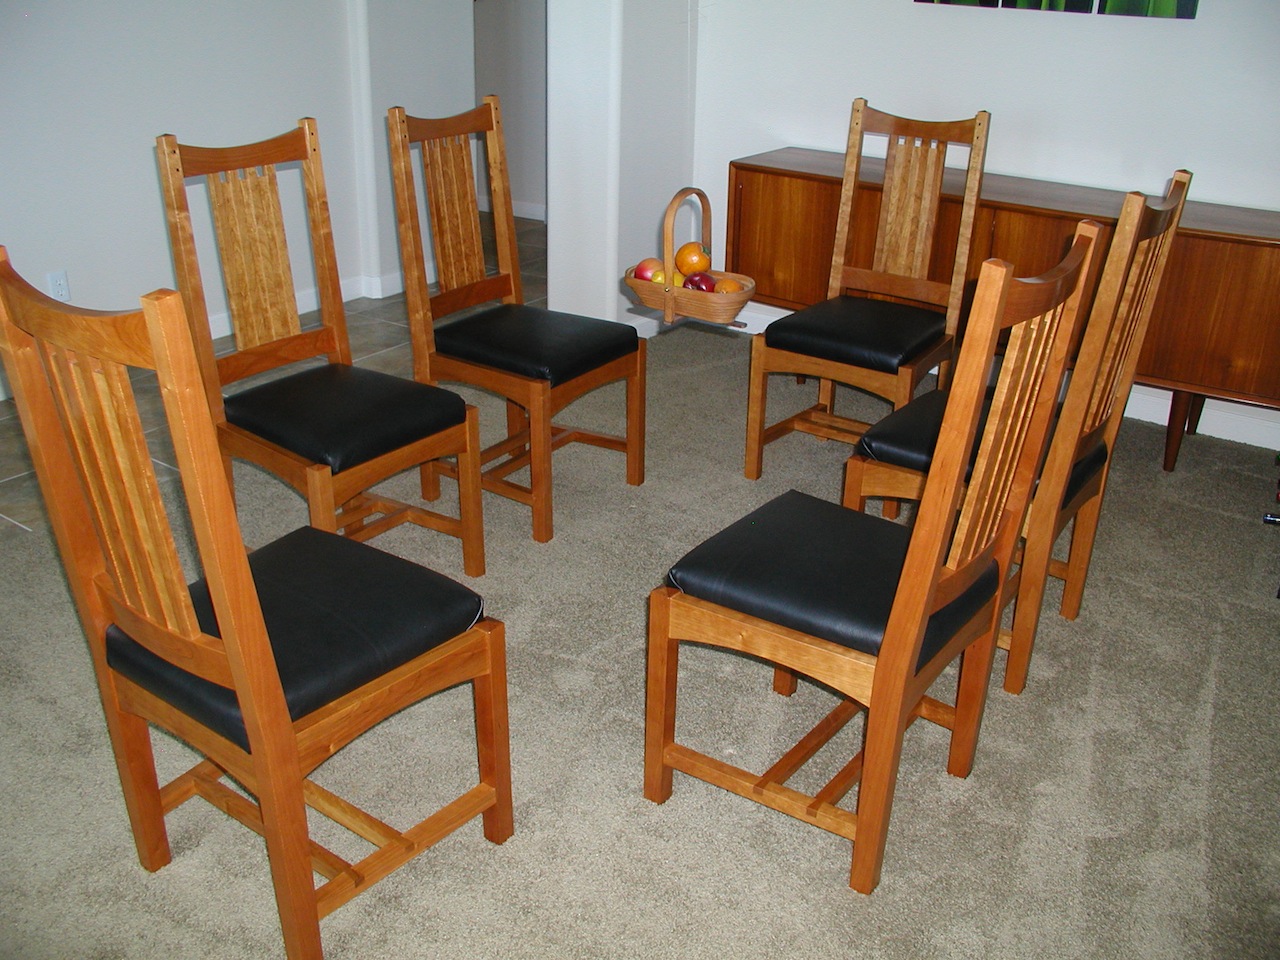 Len S Dining Set With A Touch Of Greene Greene The Wood